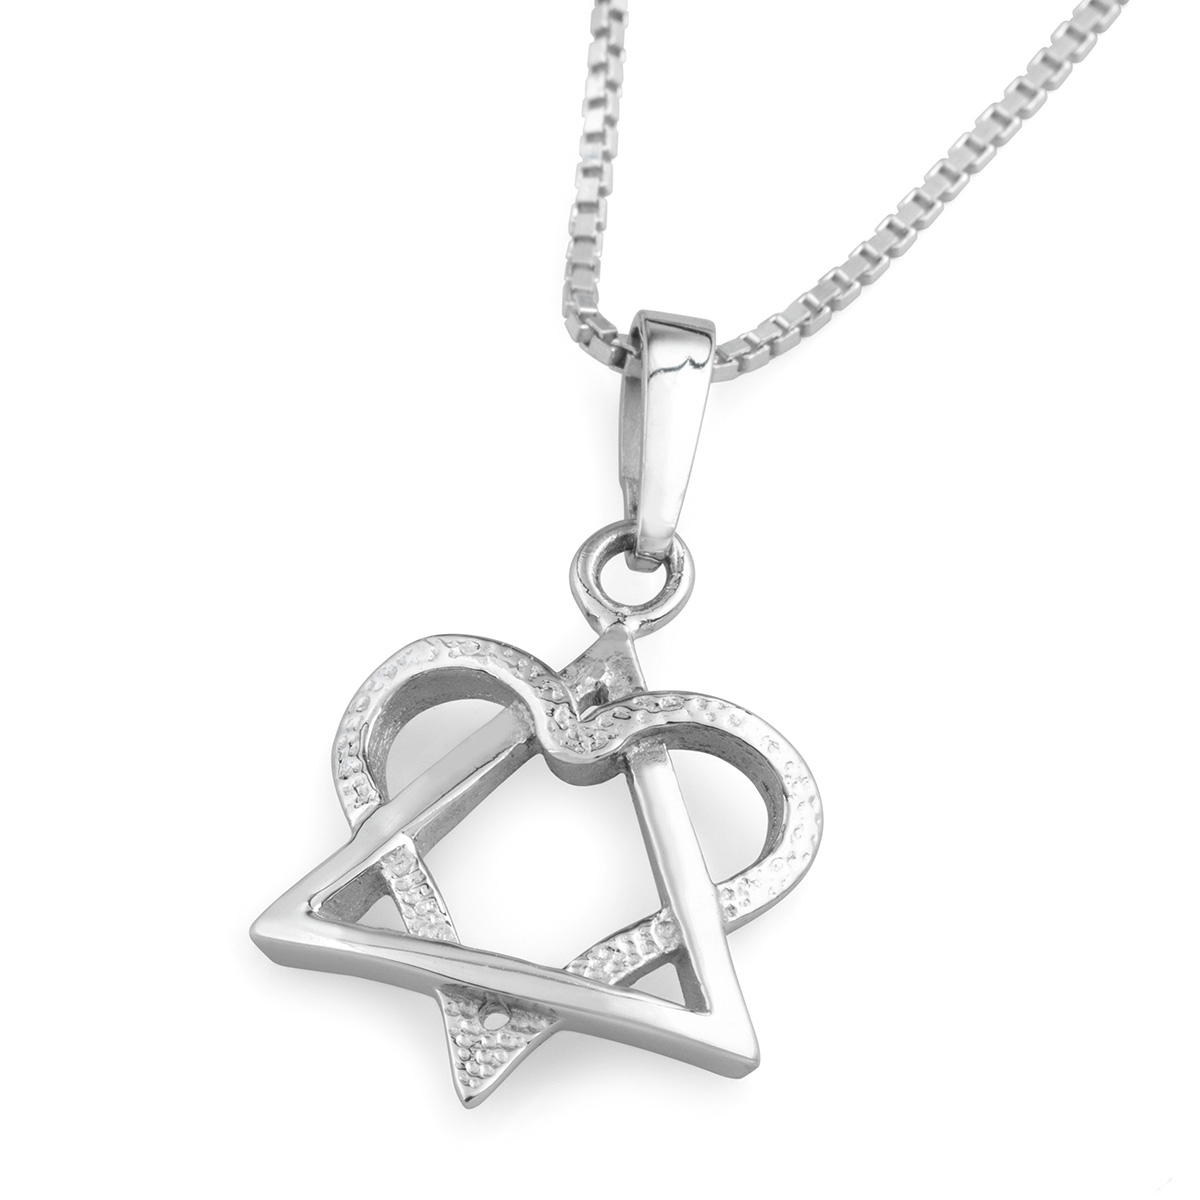 Rafael Jewelry Handcrafted 14K White Gold Heart & Star of David Pendant Necklace - 1